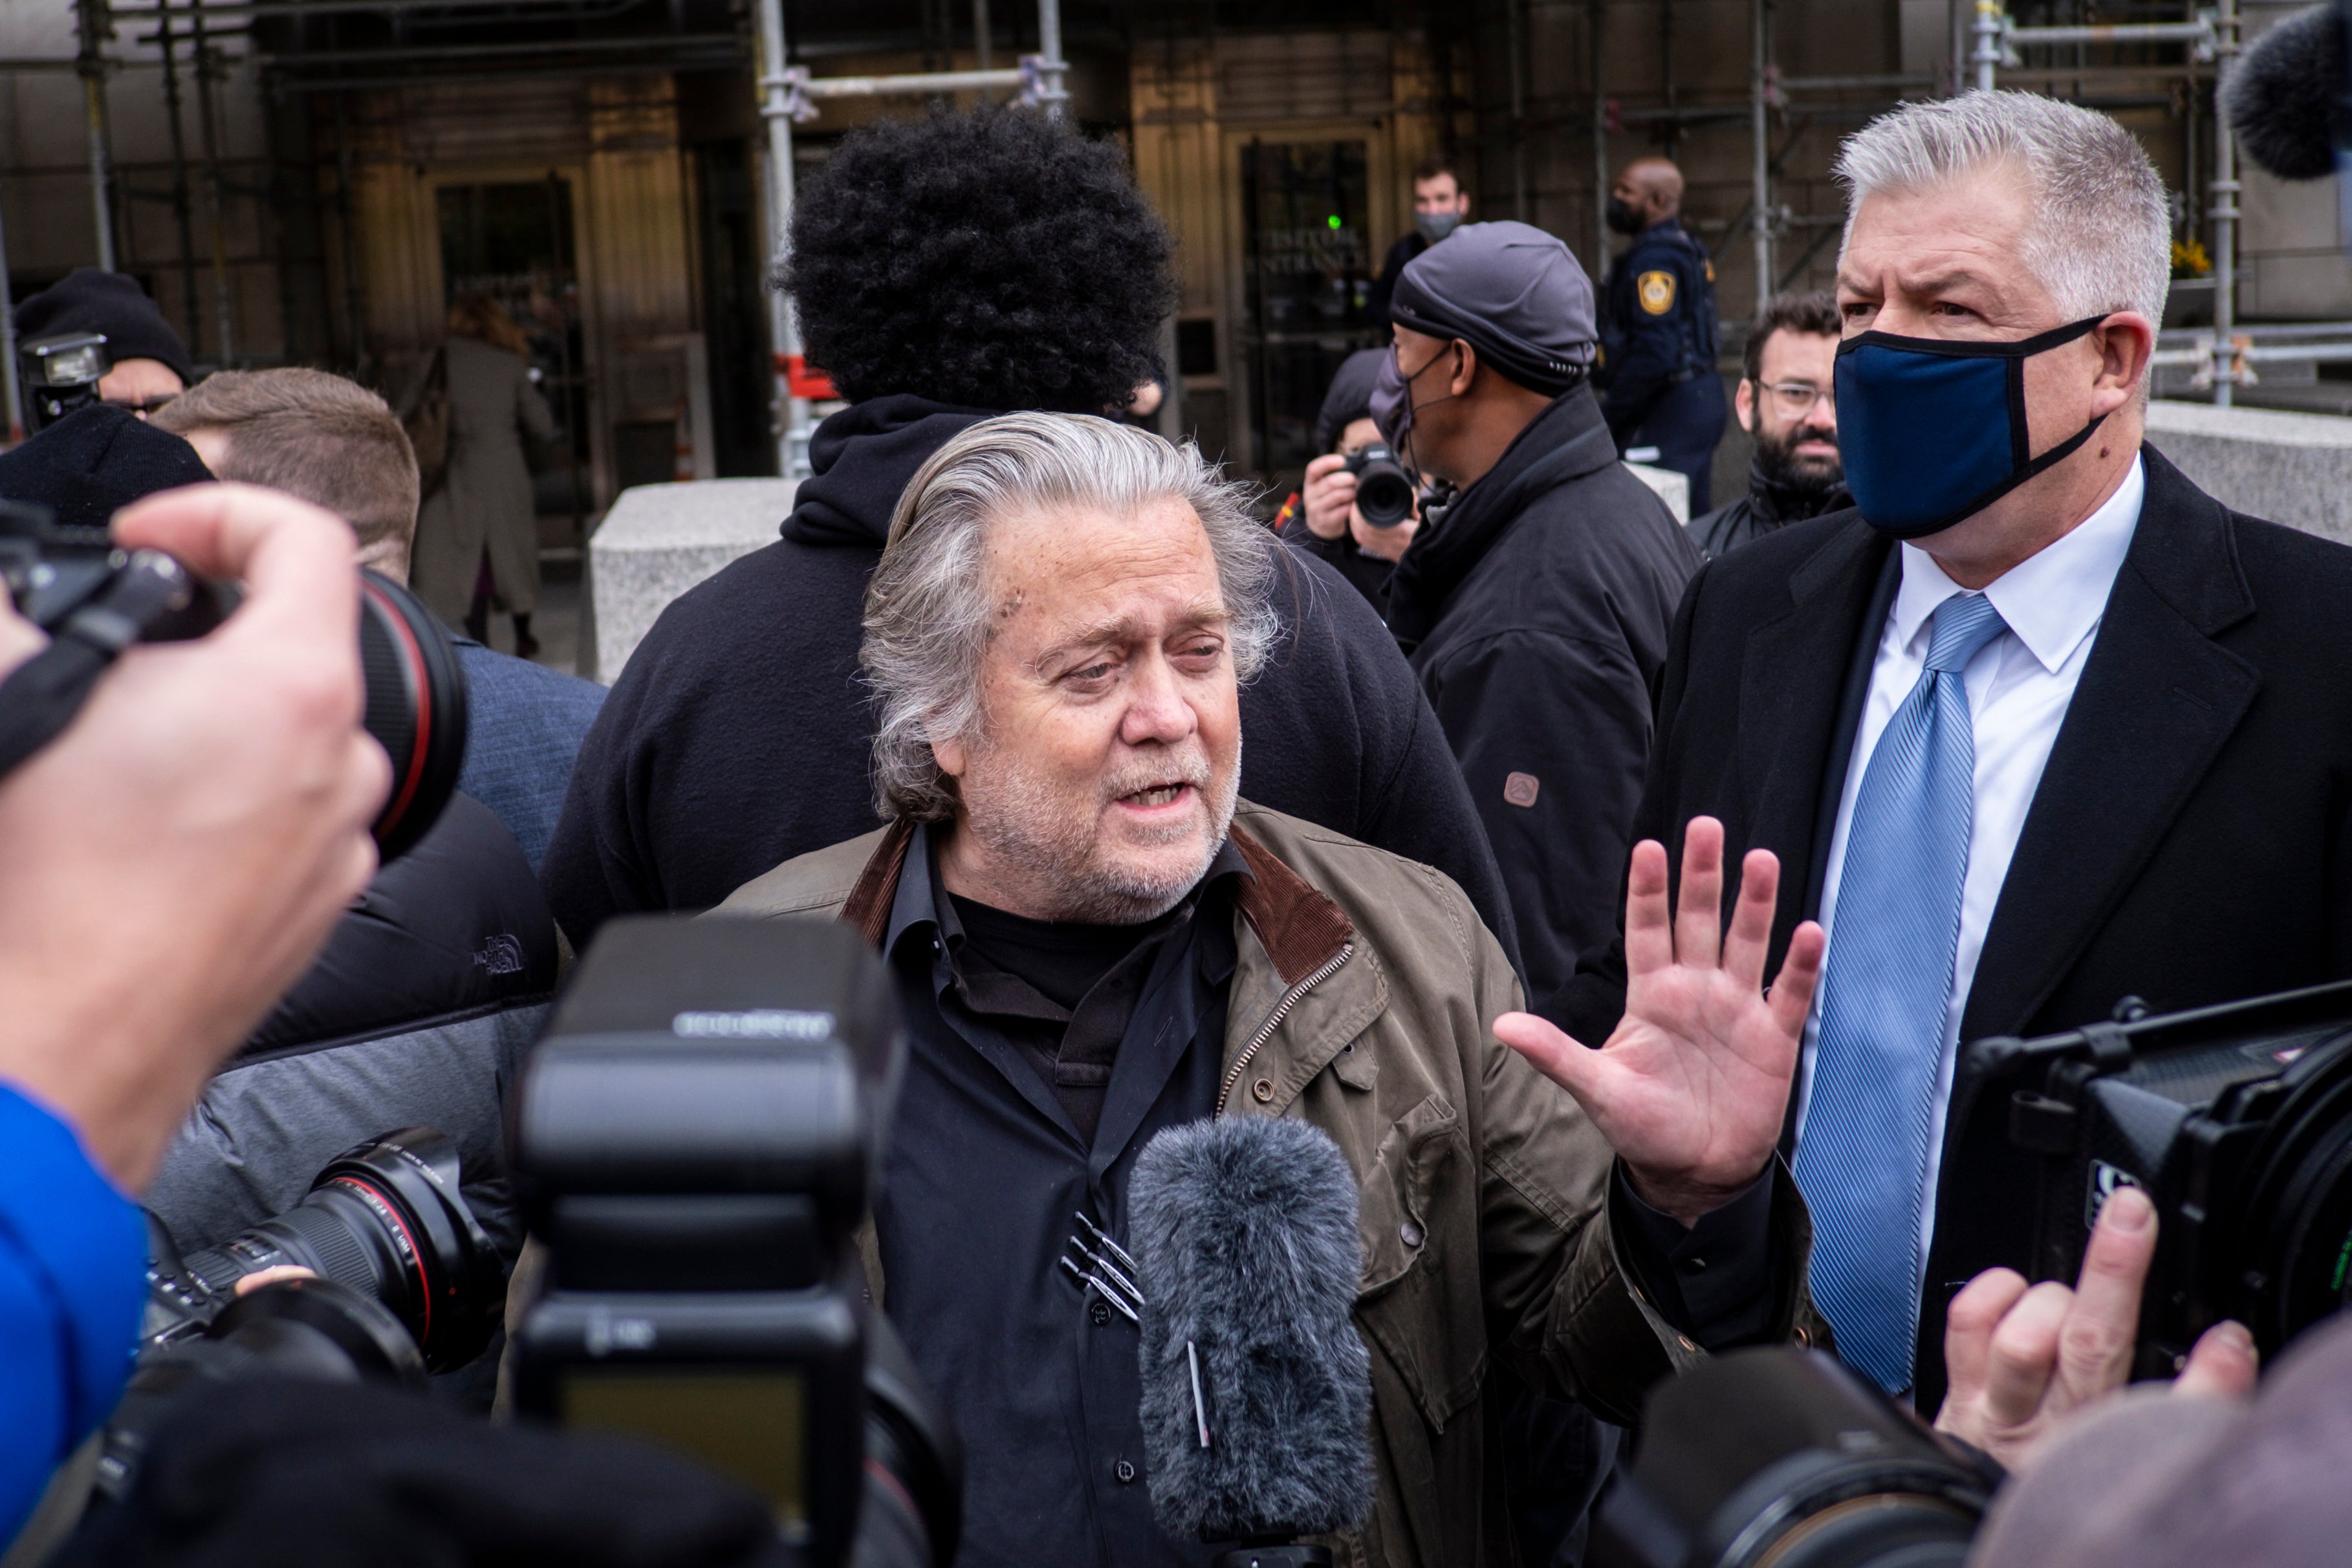 Trump ally and former White House adviser Steve Bannon arrives to turn himself into authorities at the FBI Field Office in Washington, DC, on Monday